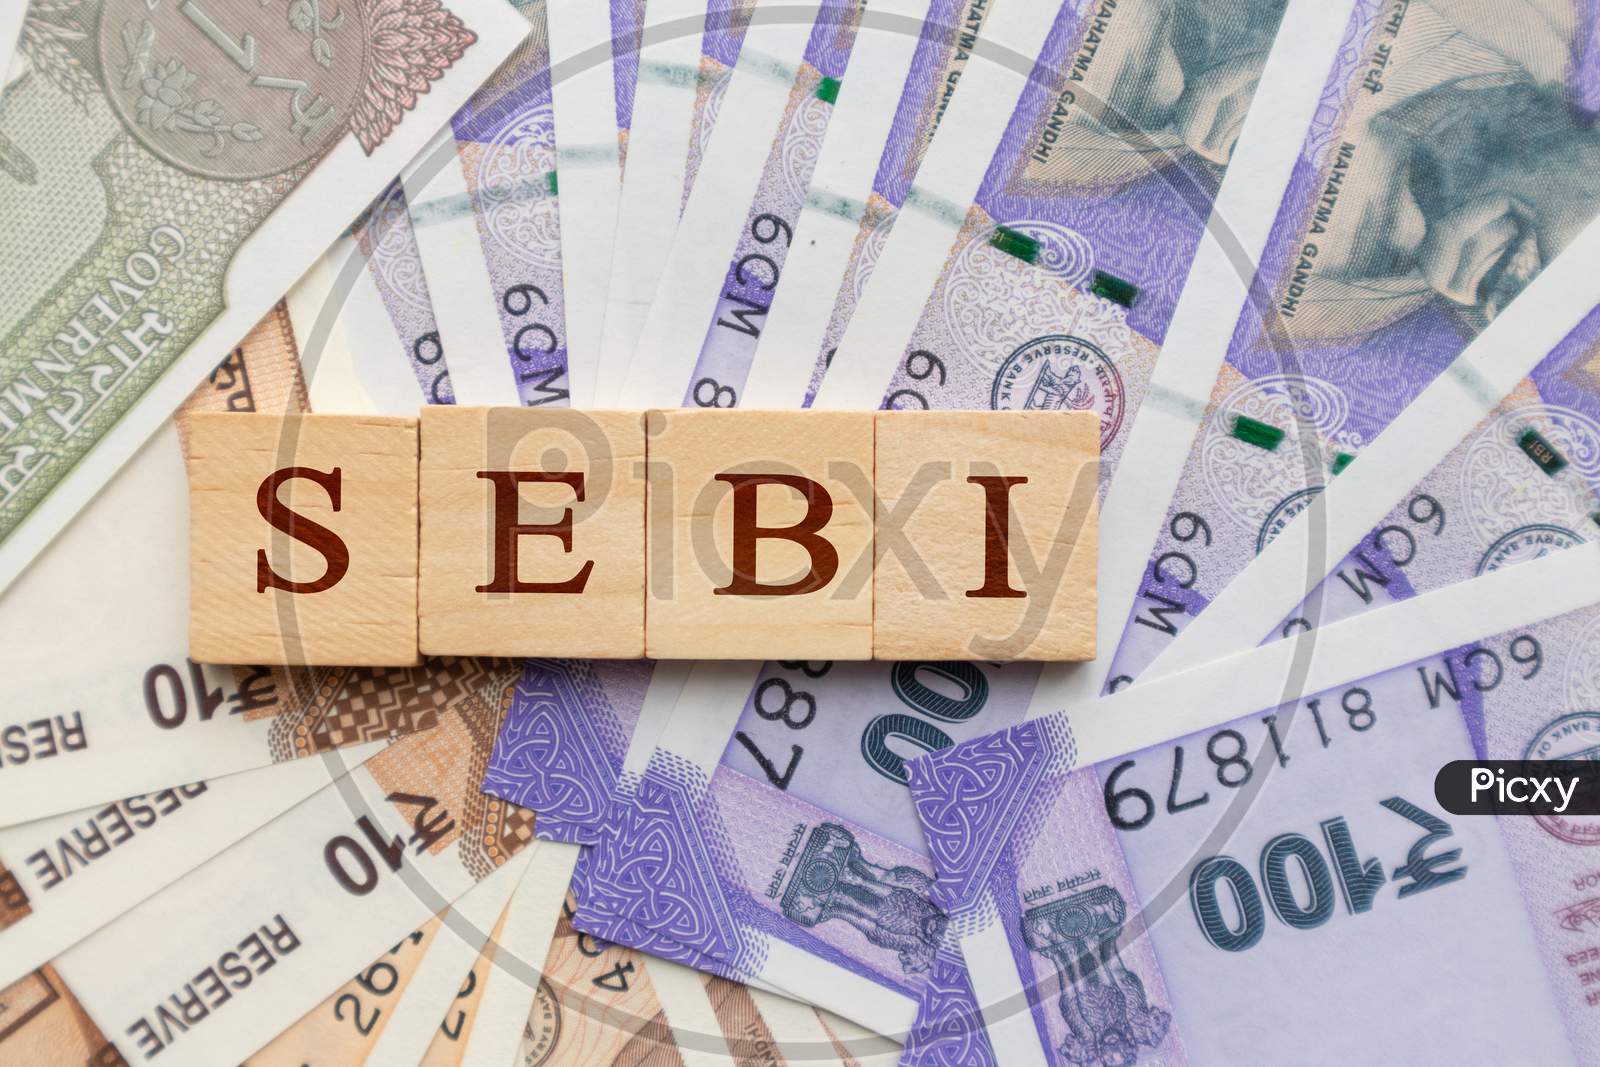 Sebi In Wooden Block Letters On Indian Currency.